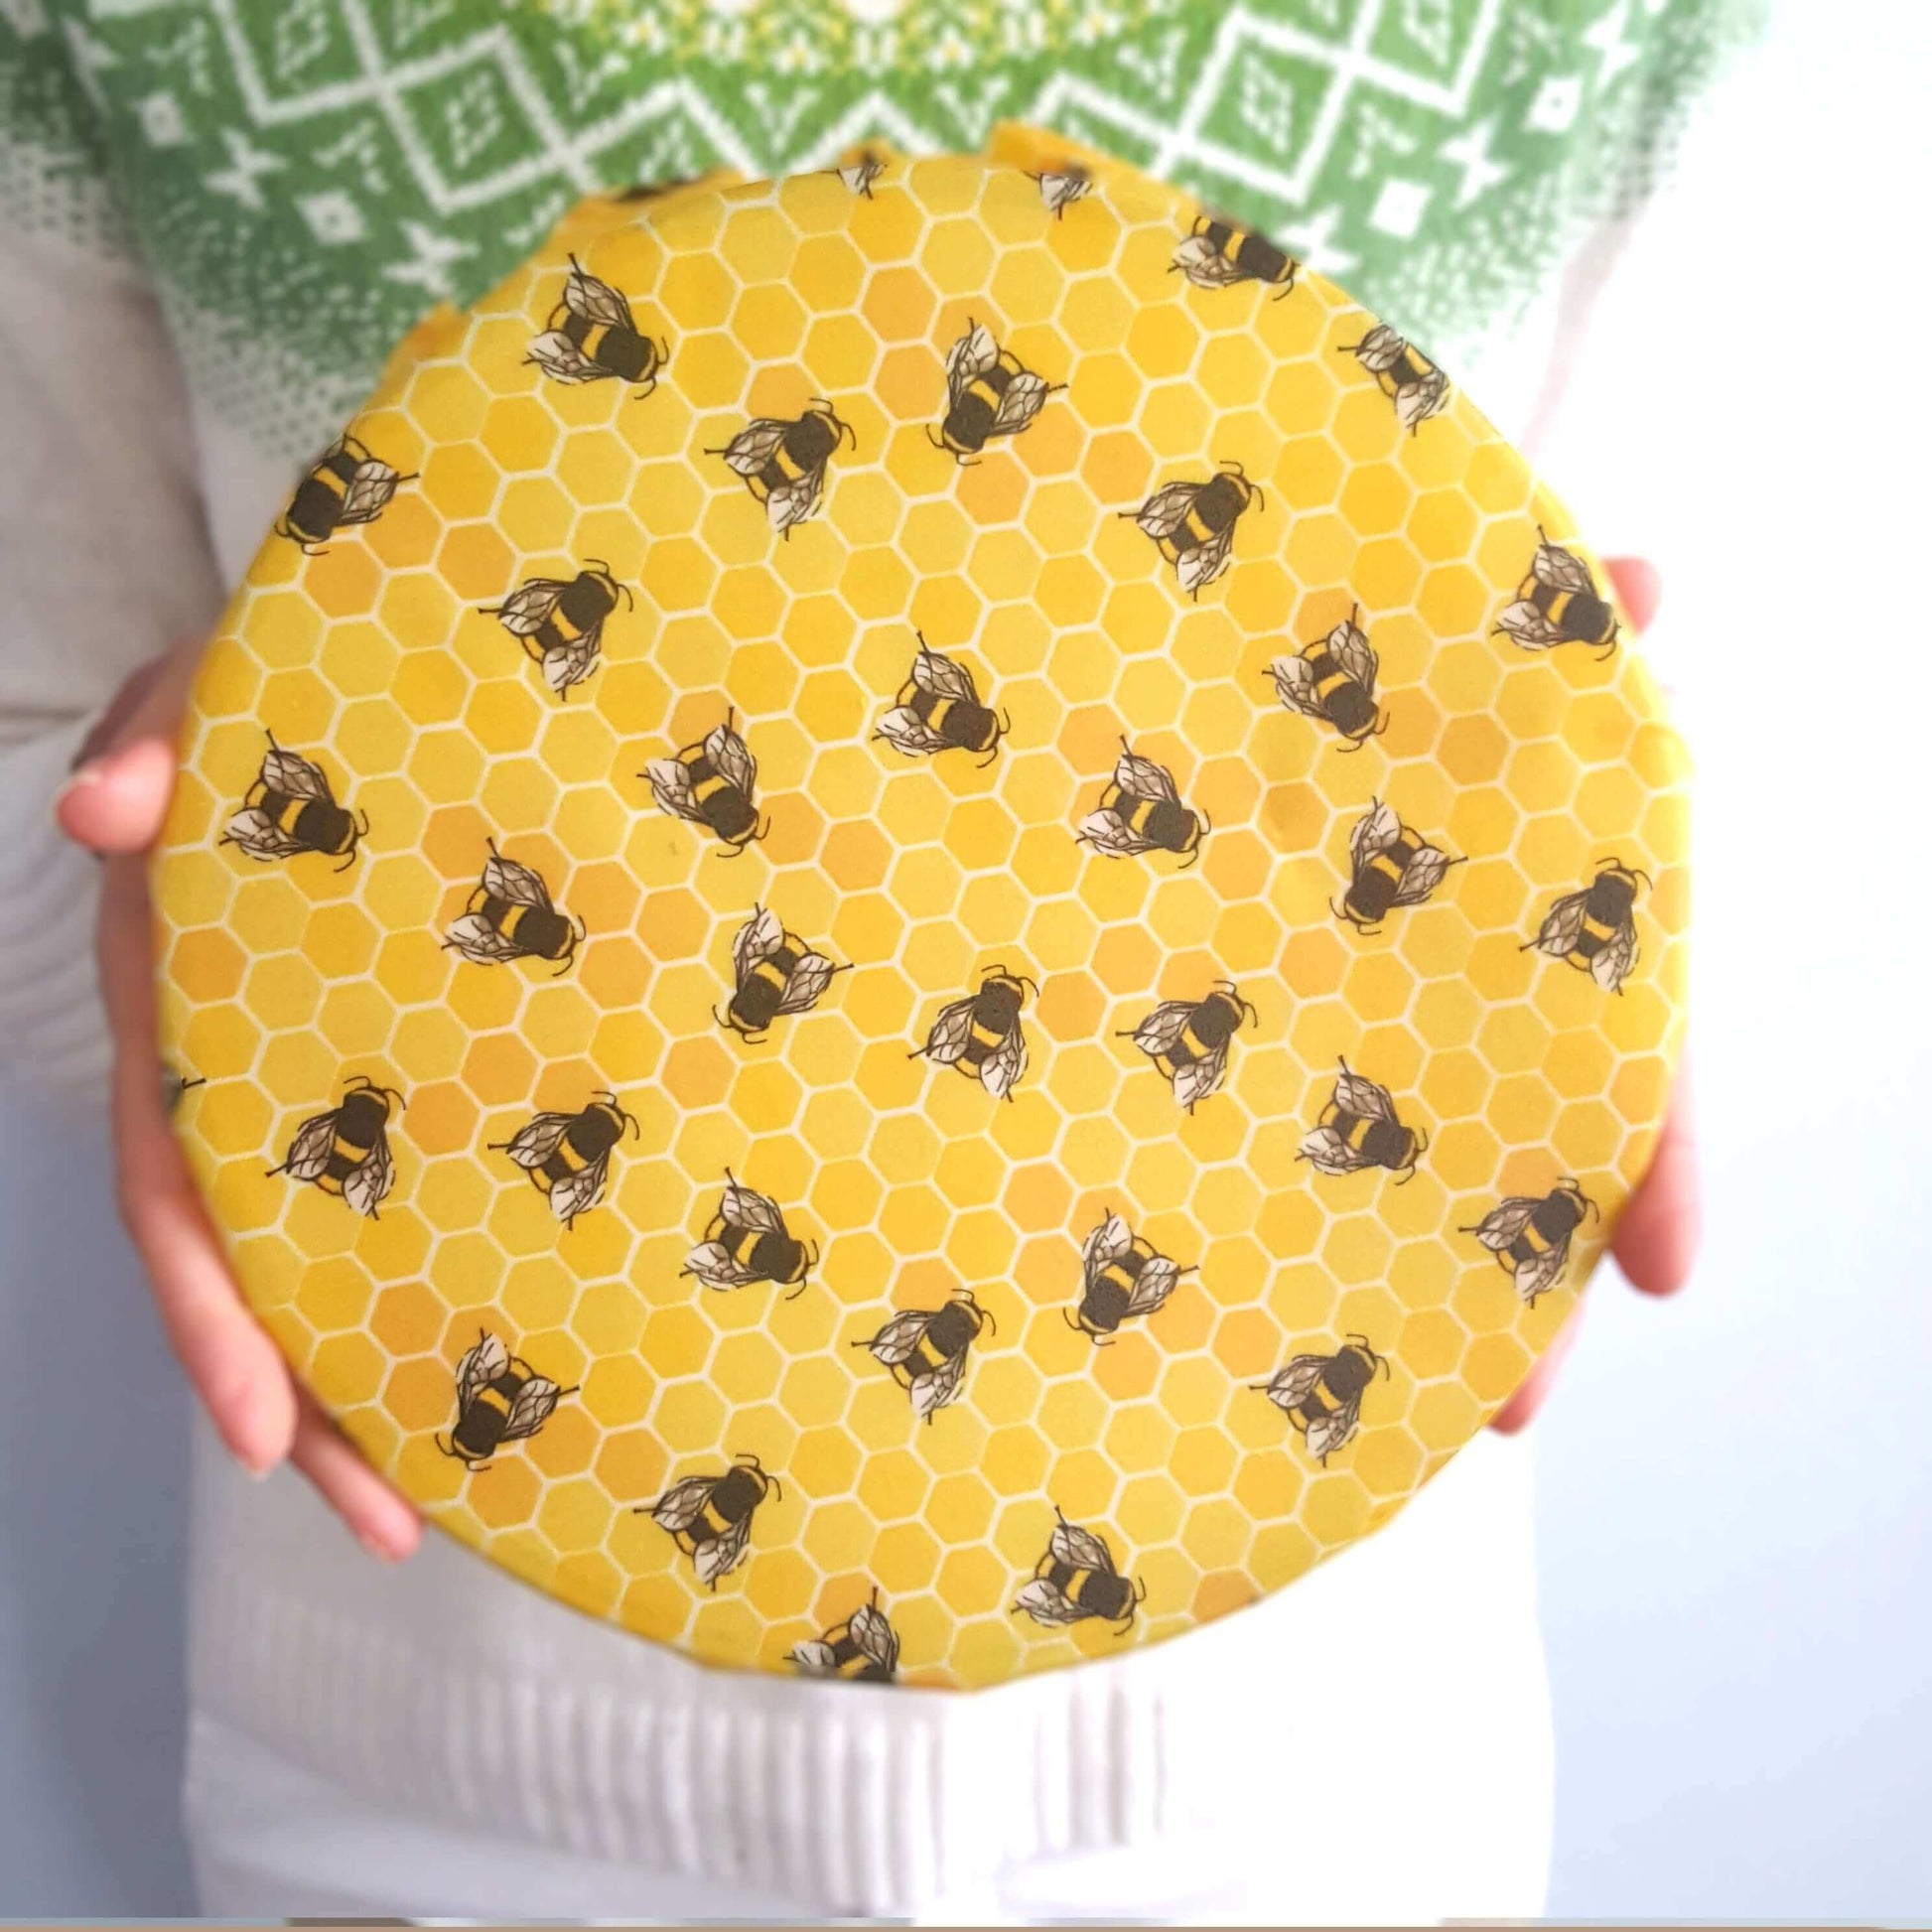 Lemony Bees Earth Kind Sandwich & Bowl Set of 2 Large Beeswax Wraps shown in use